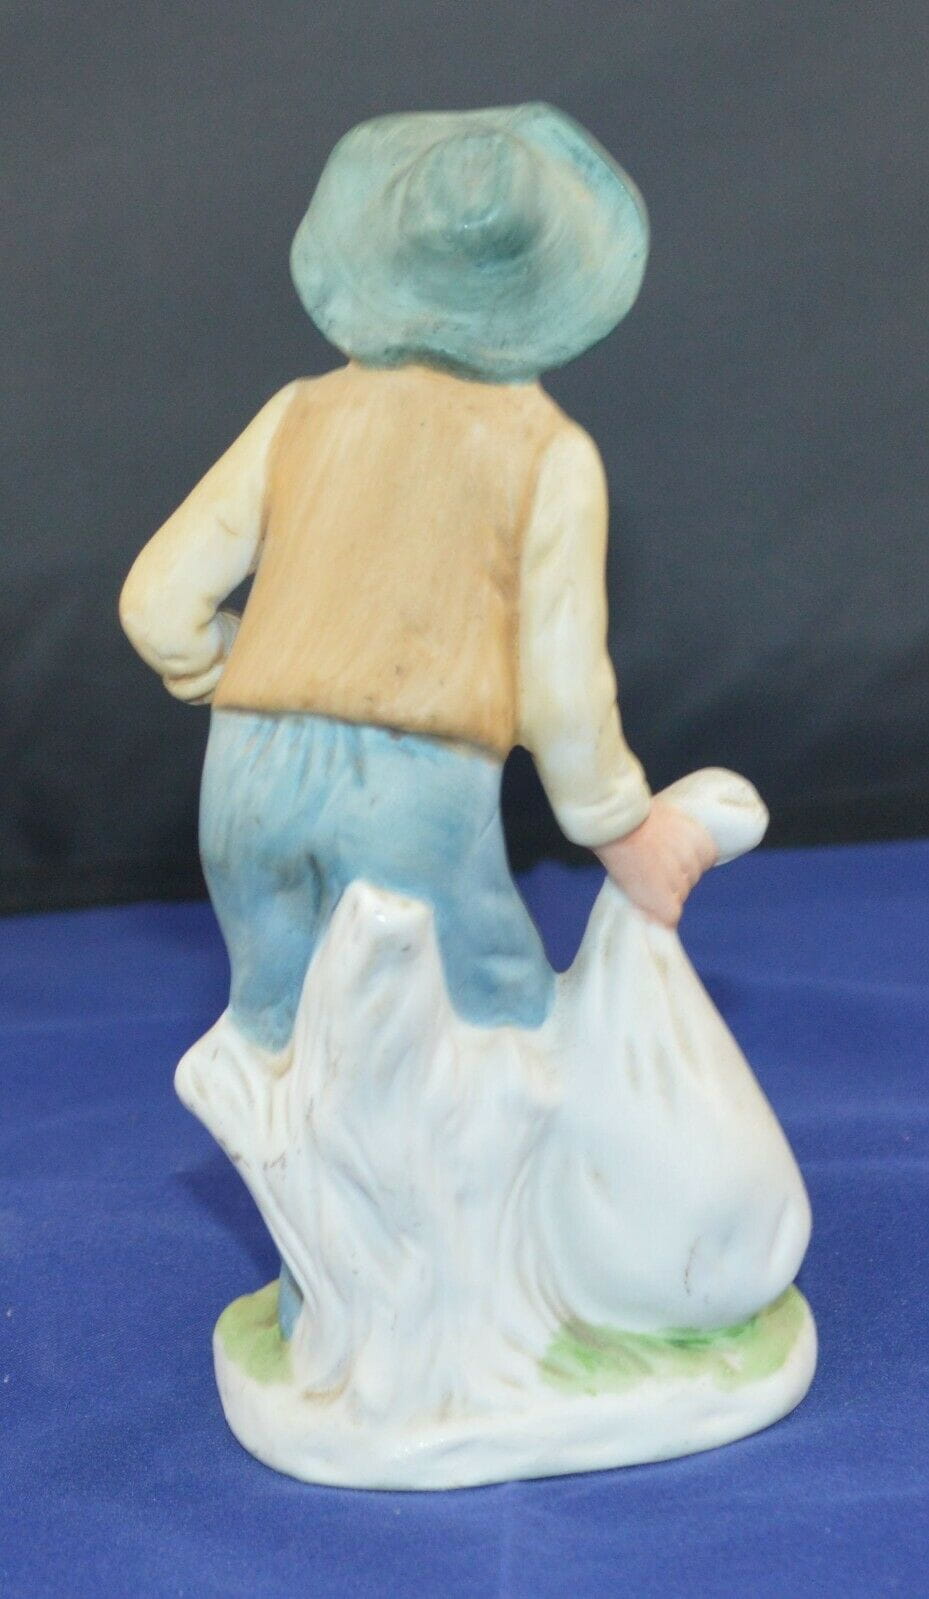 DECORATIVE FIGURINE MAN WITH CARROTS(PREVIOUSLY OWNED)GOOD CONDITION - TMD167207